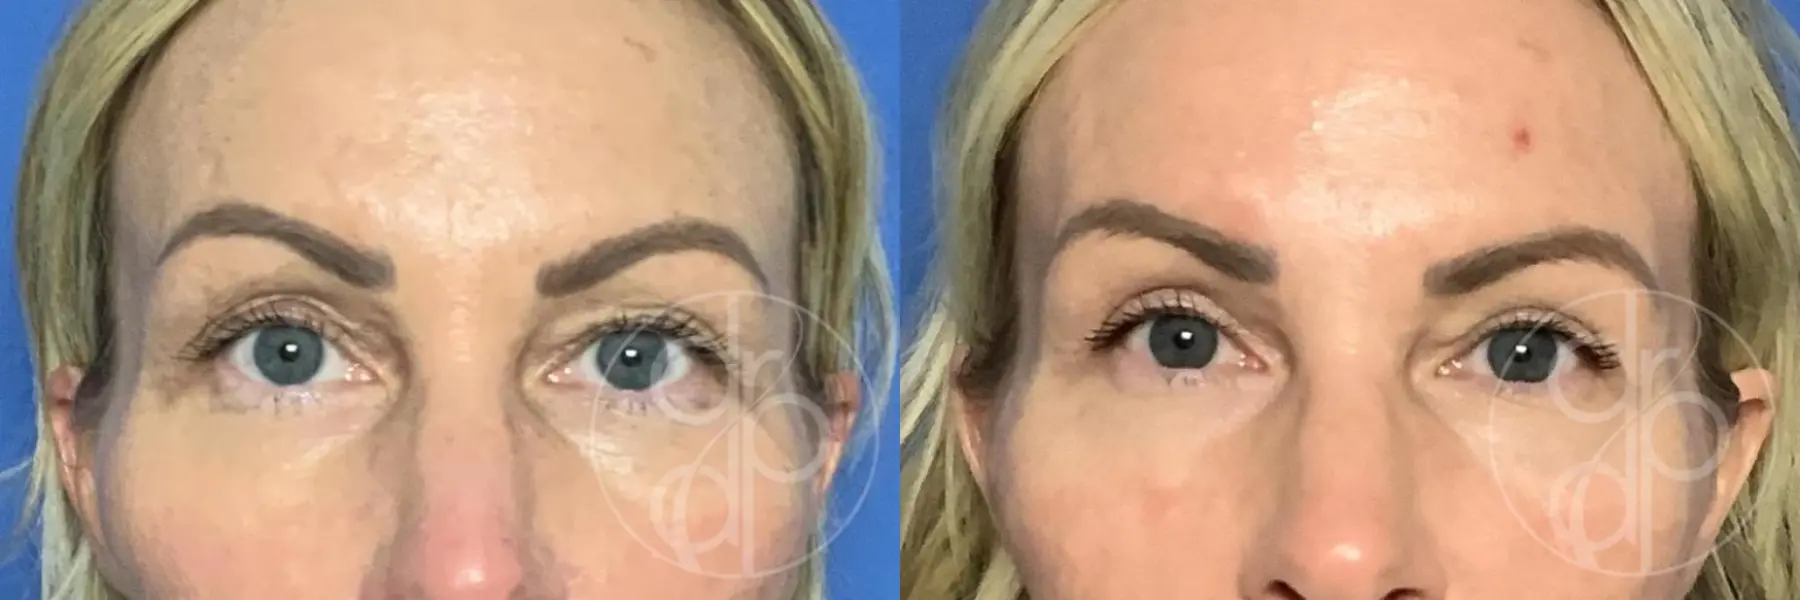 Patient 12733 Blepharoplasty procedure before and after result - Before and After